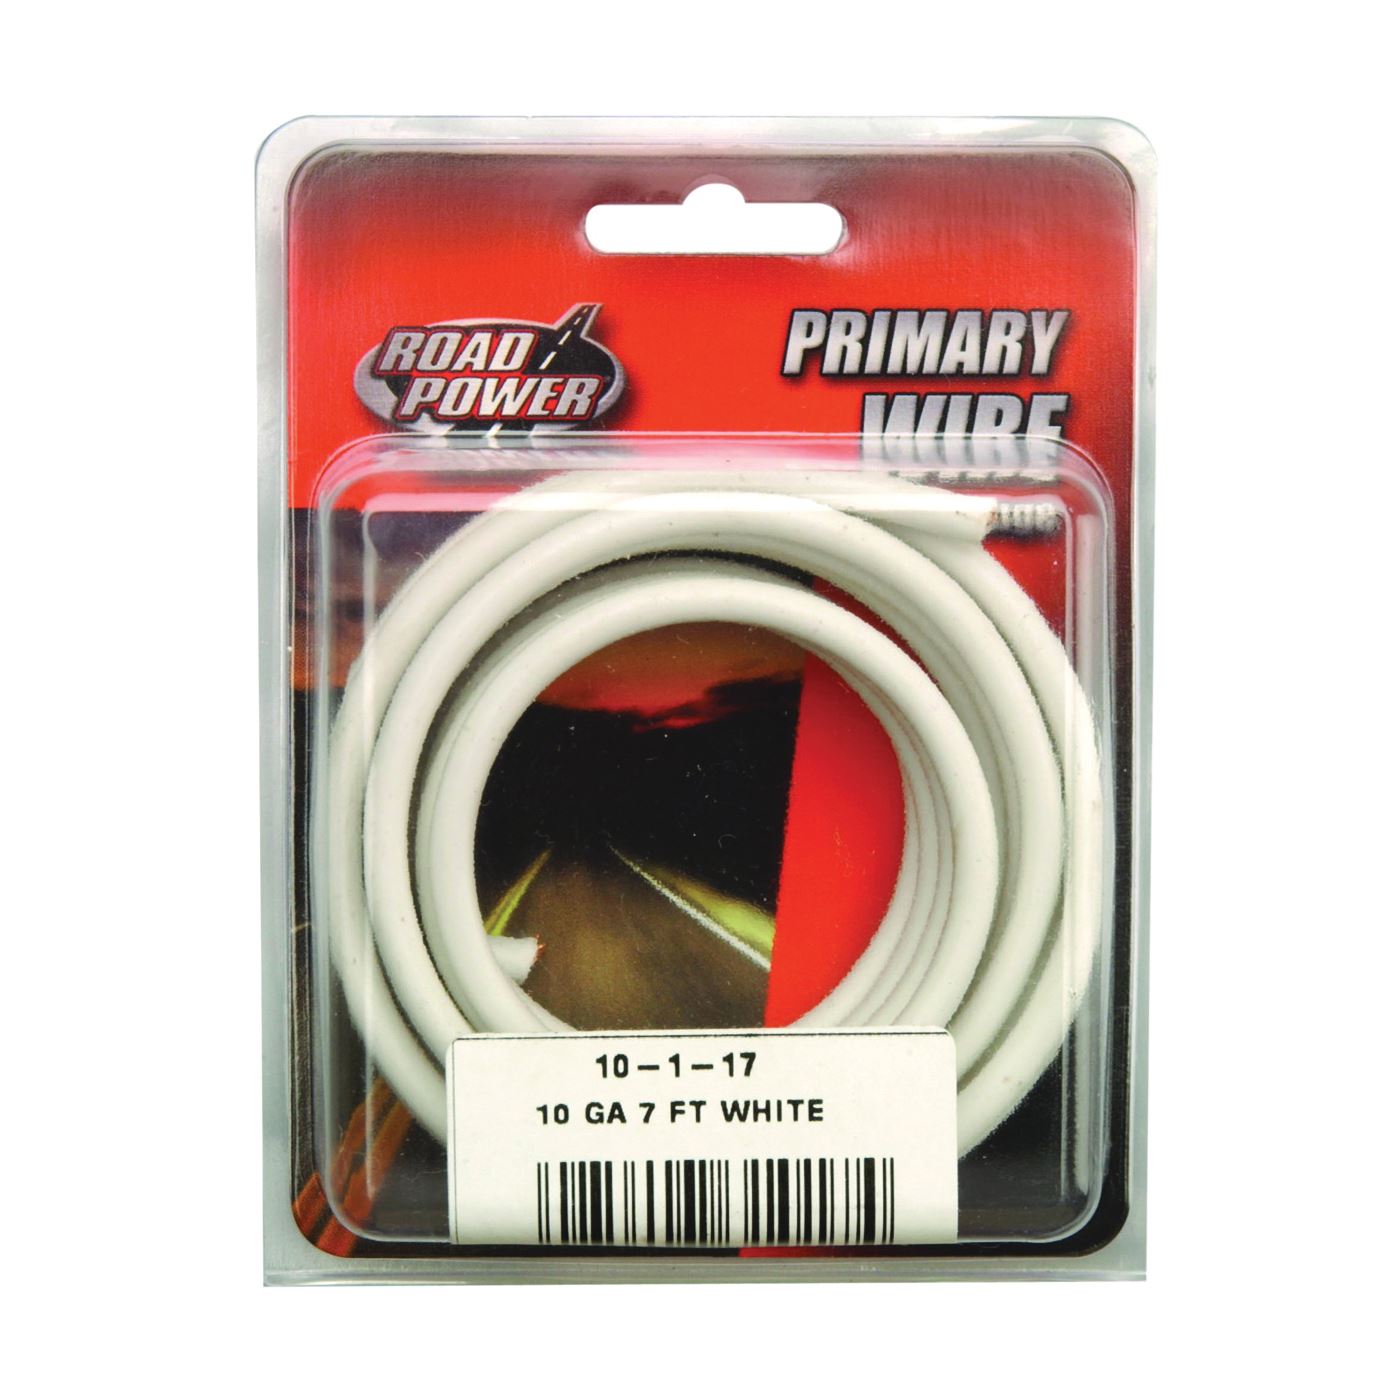 Red Coleman Cable 16-1-16 16-Gauge 24-Foot Automotive Copper Wire 